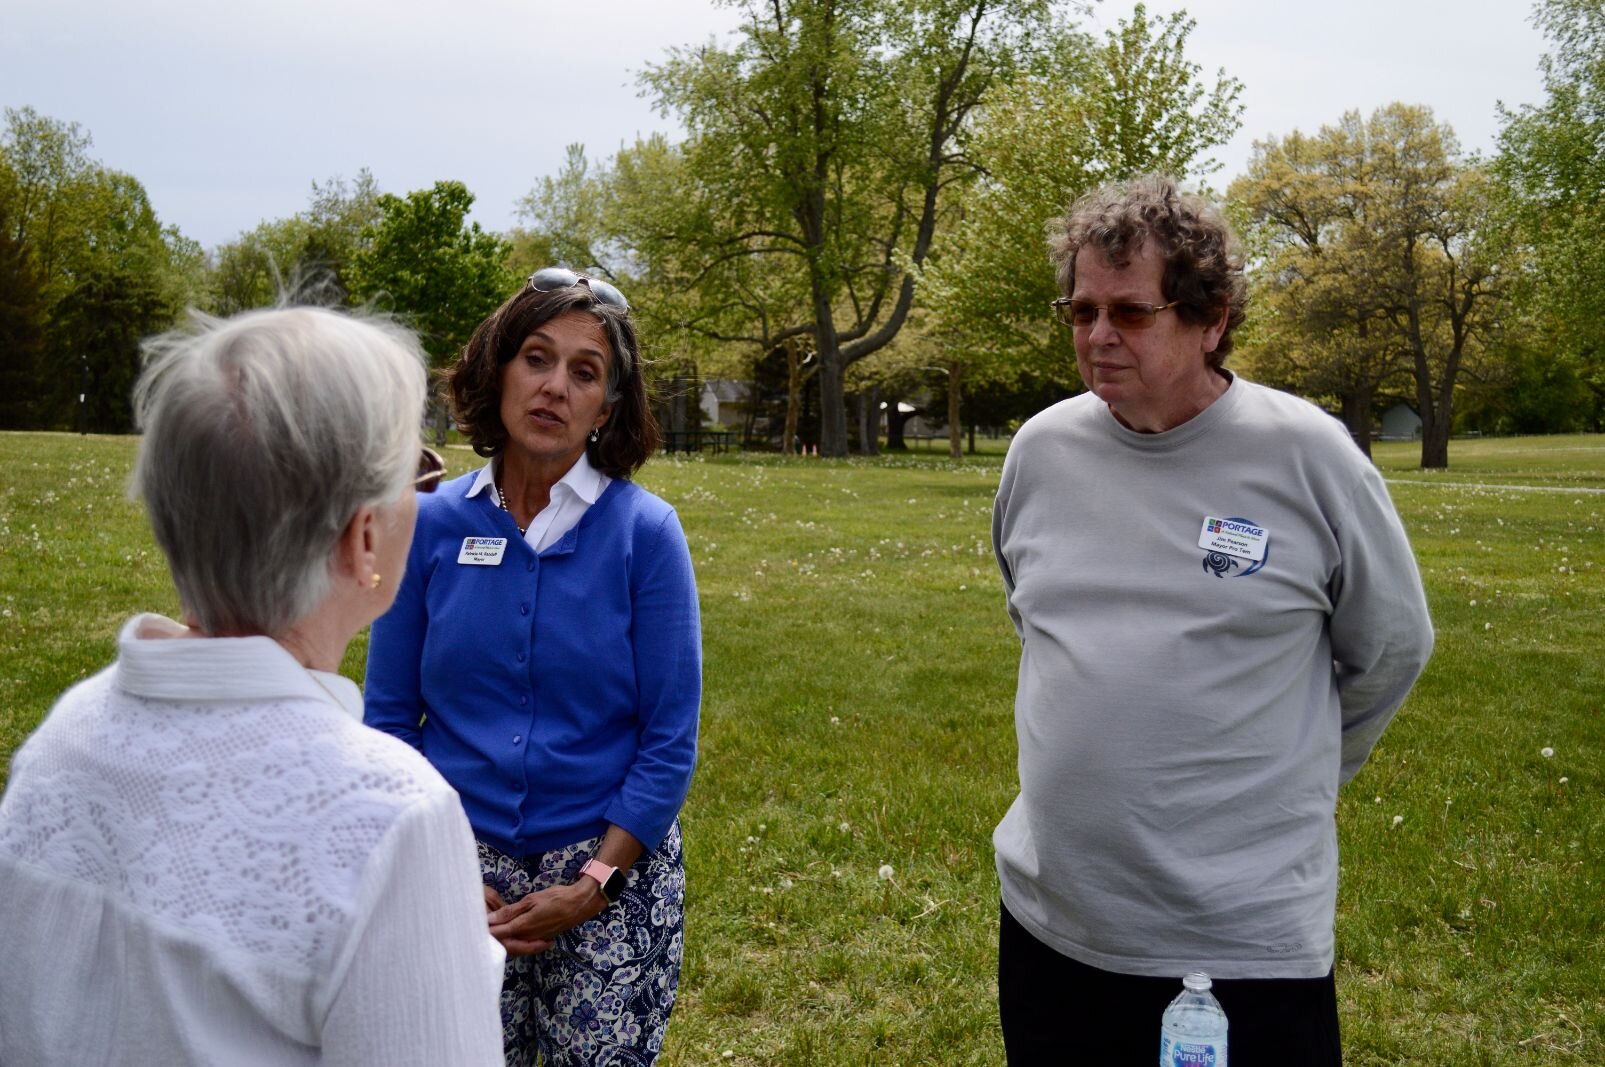 Portage Mayor Patricia Randall and Mayor Pro Tem Jim Pearson meet with residents at the open air open-house for the Lake Center District Corridor Placemaking study May 15.